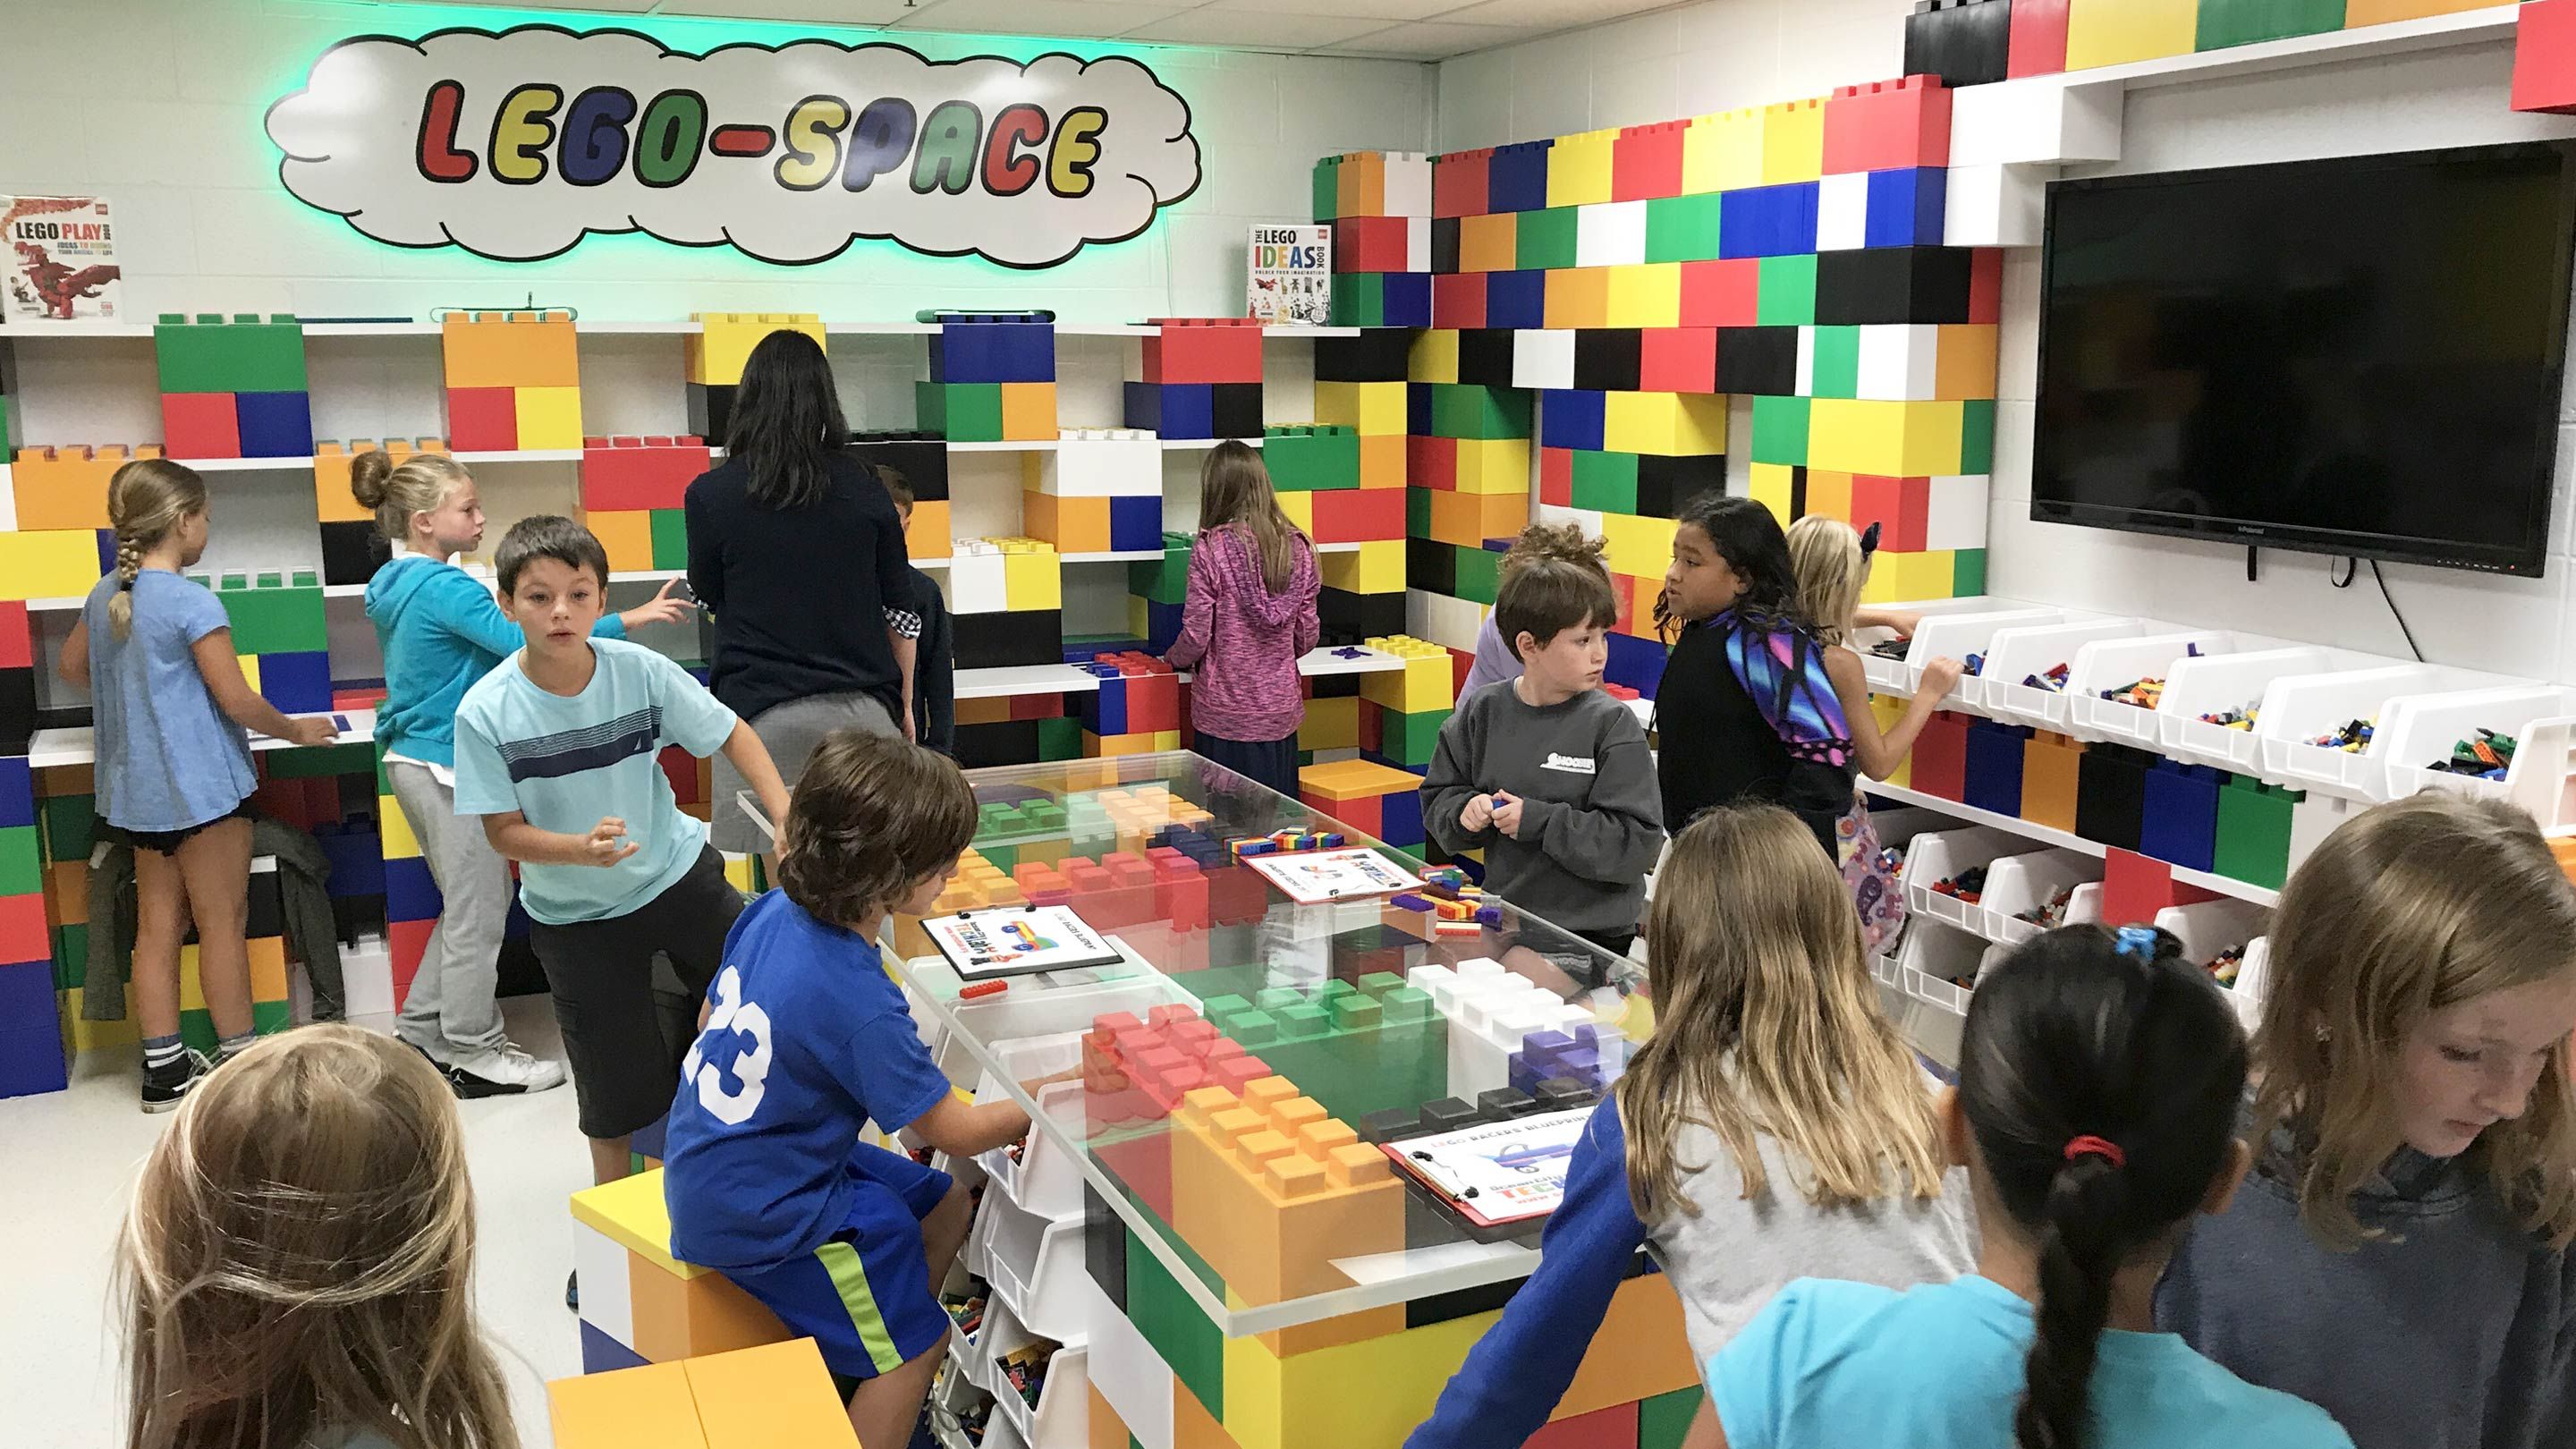 A Makerspace Built by Elementary Students | Edutopia